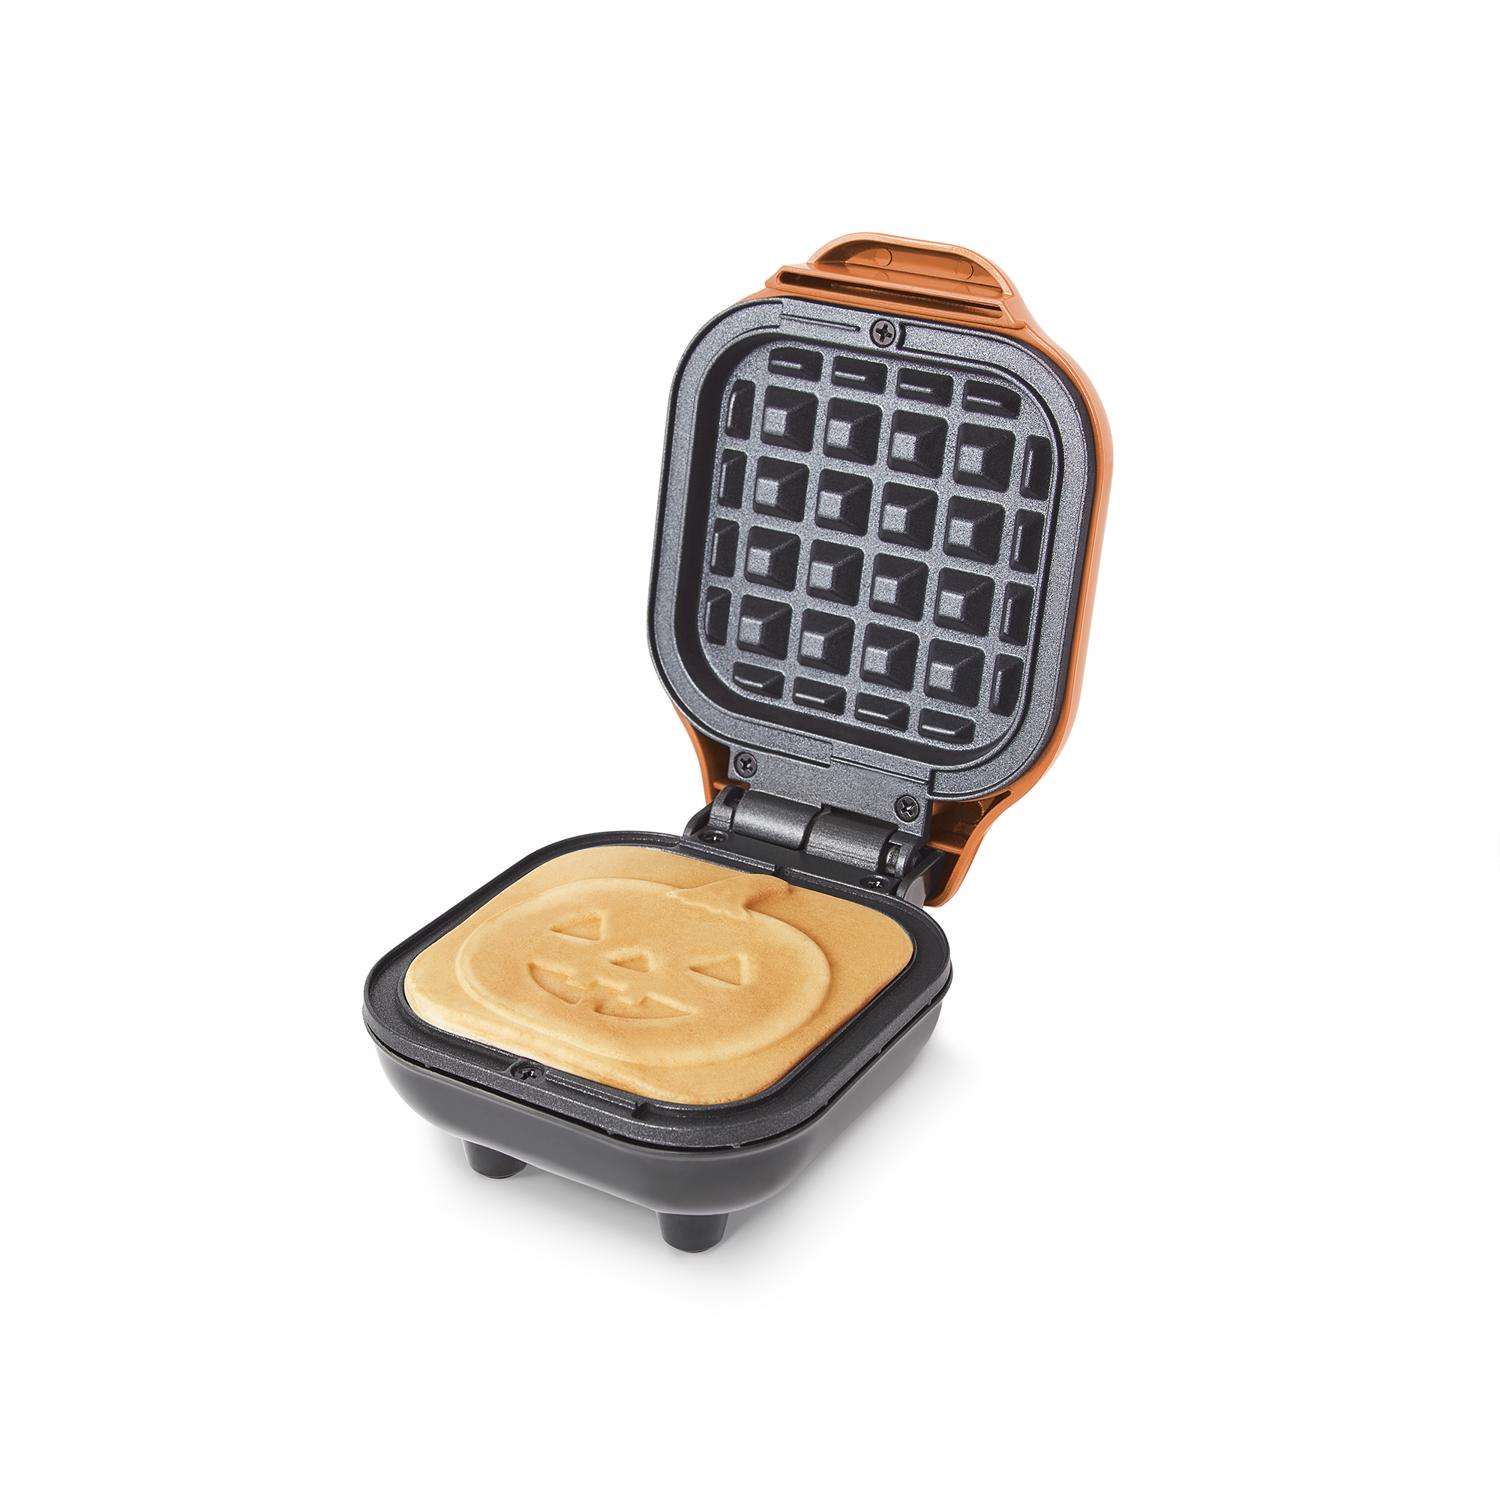 1pc Waffle Maker With Mini Griddle, 4-inch Single Waffle, Pancake Maker,  Muffin And Sandwich Breakfast Machine, Easy To Clean, Non-stick Surface